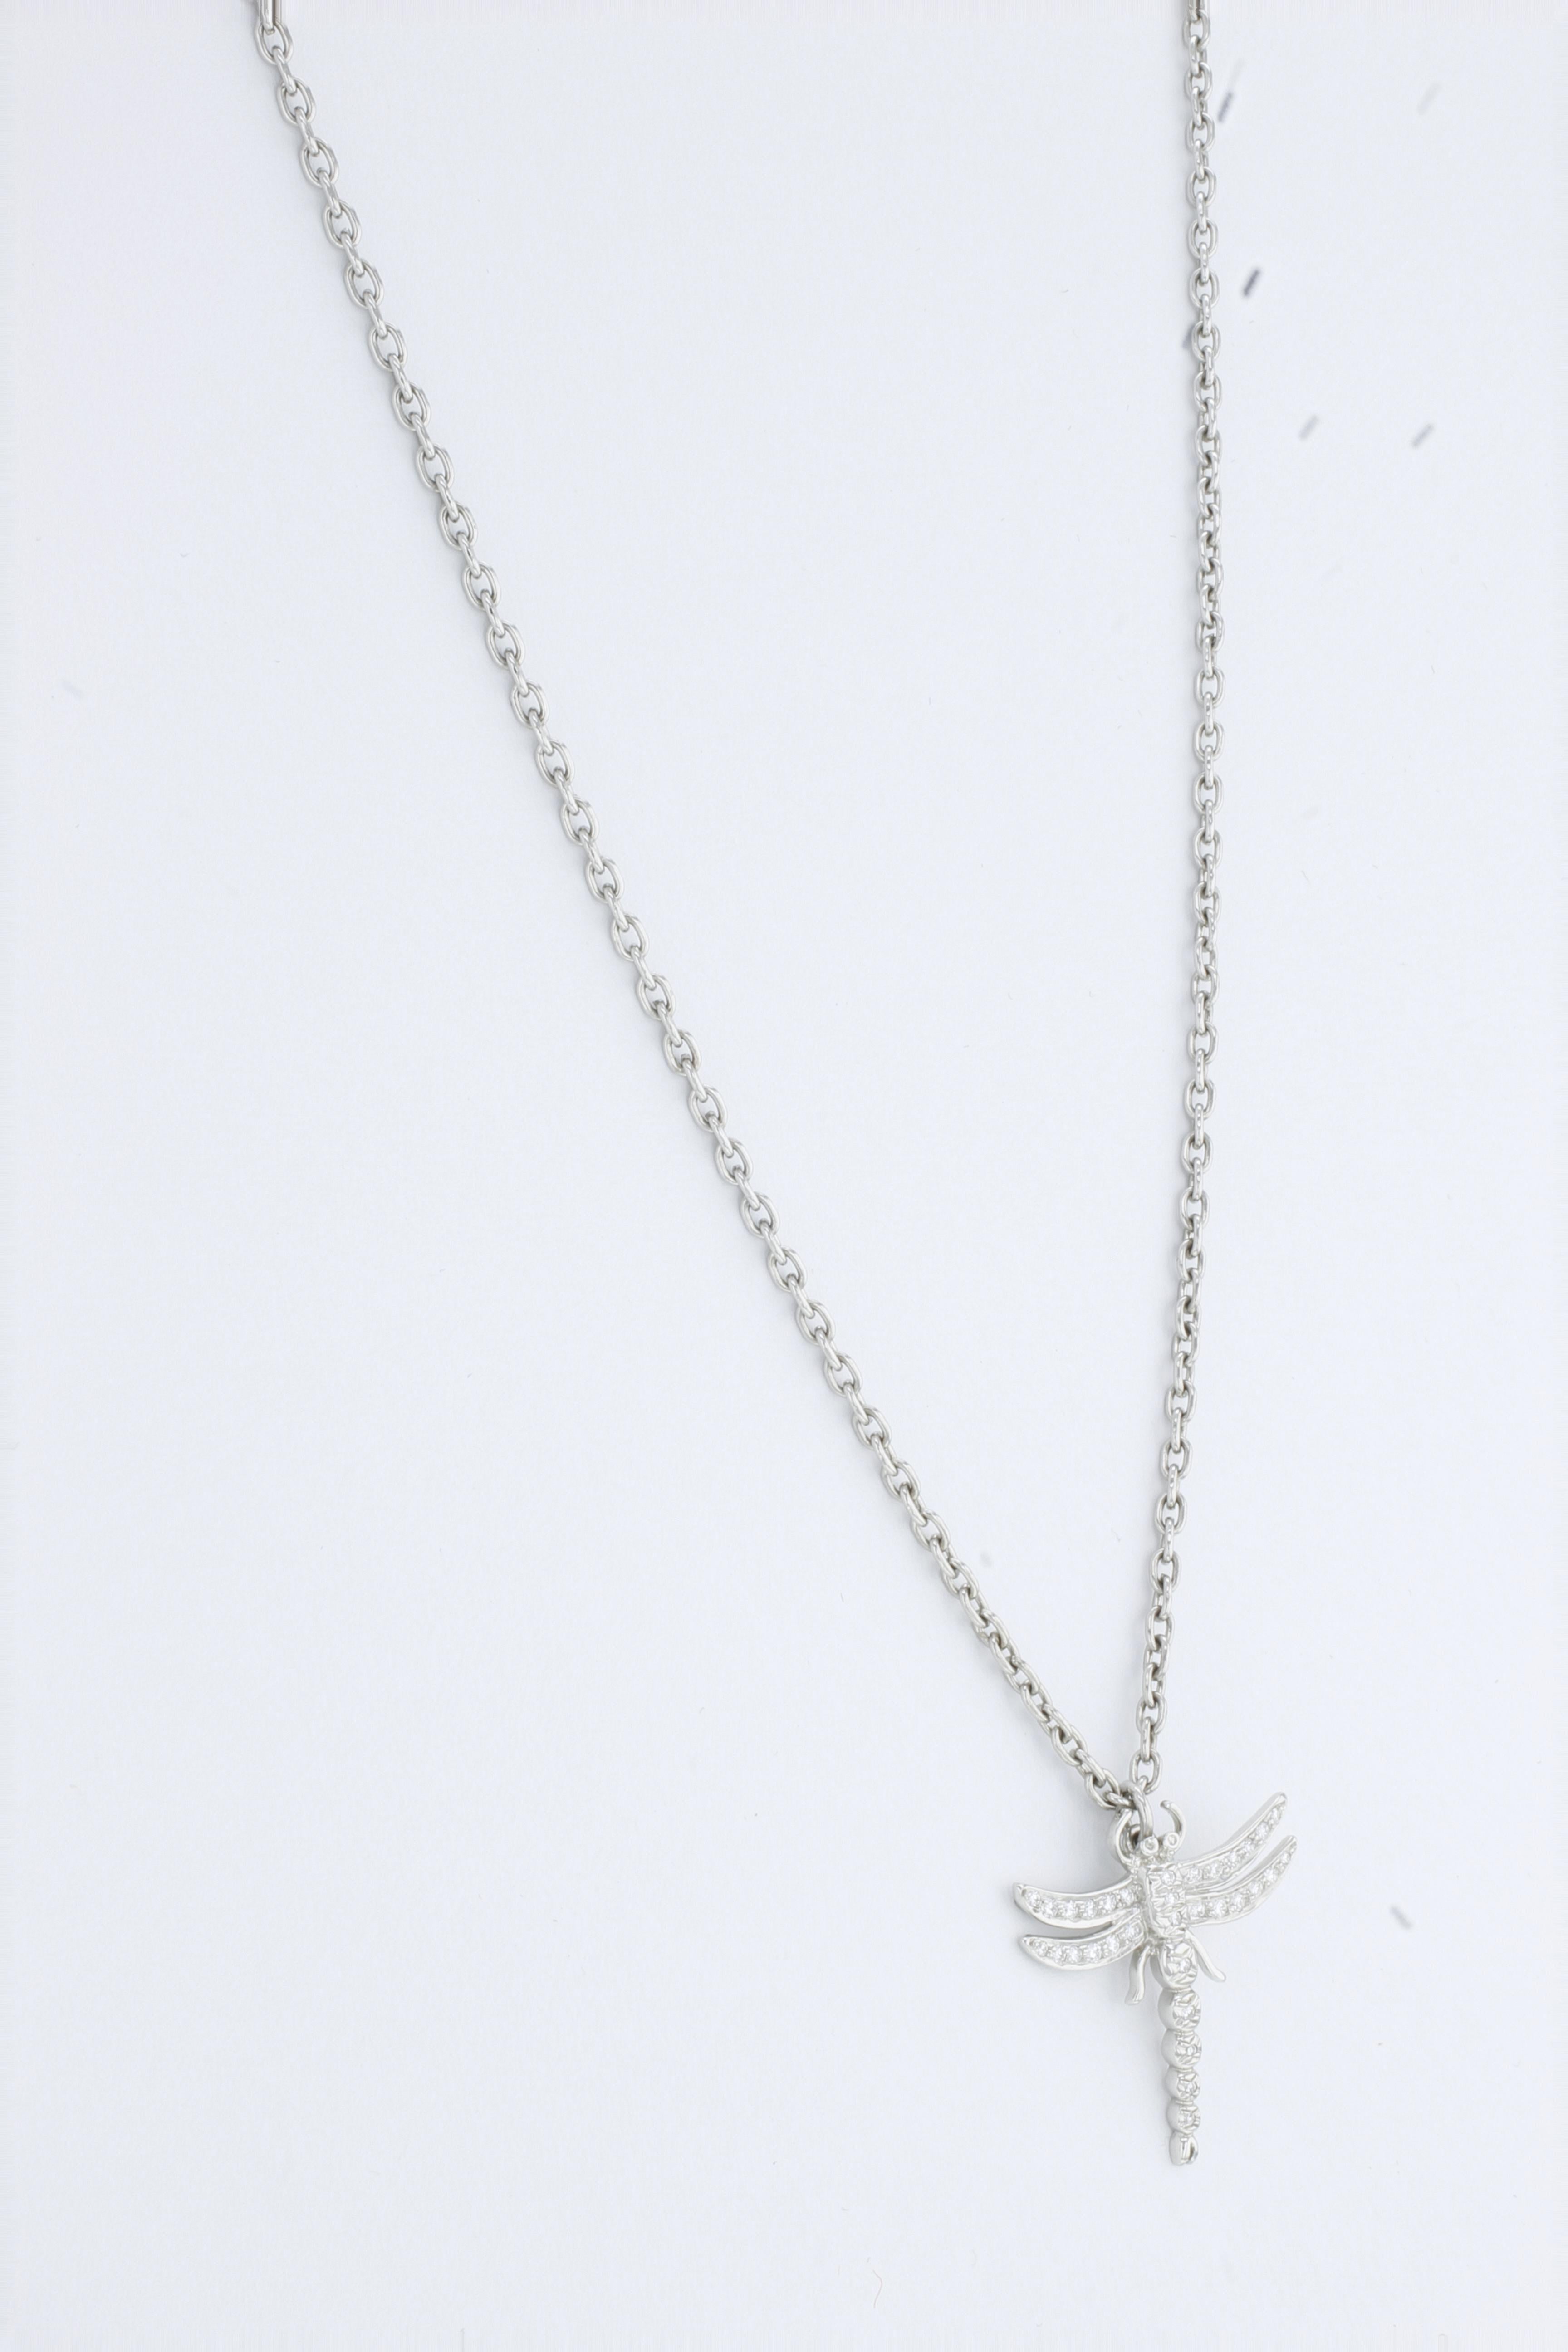 TIFFAY & CO. PLATINUM DRAGONFLY PENDANT AND CHAIN

A charming and collectable Tiffany & Co. Dragonfly Necklace, beautifully crafted in platinum and set with diamonds.

For over 100 years Tiffany & Co. have been incorporating the dragonfly into their